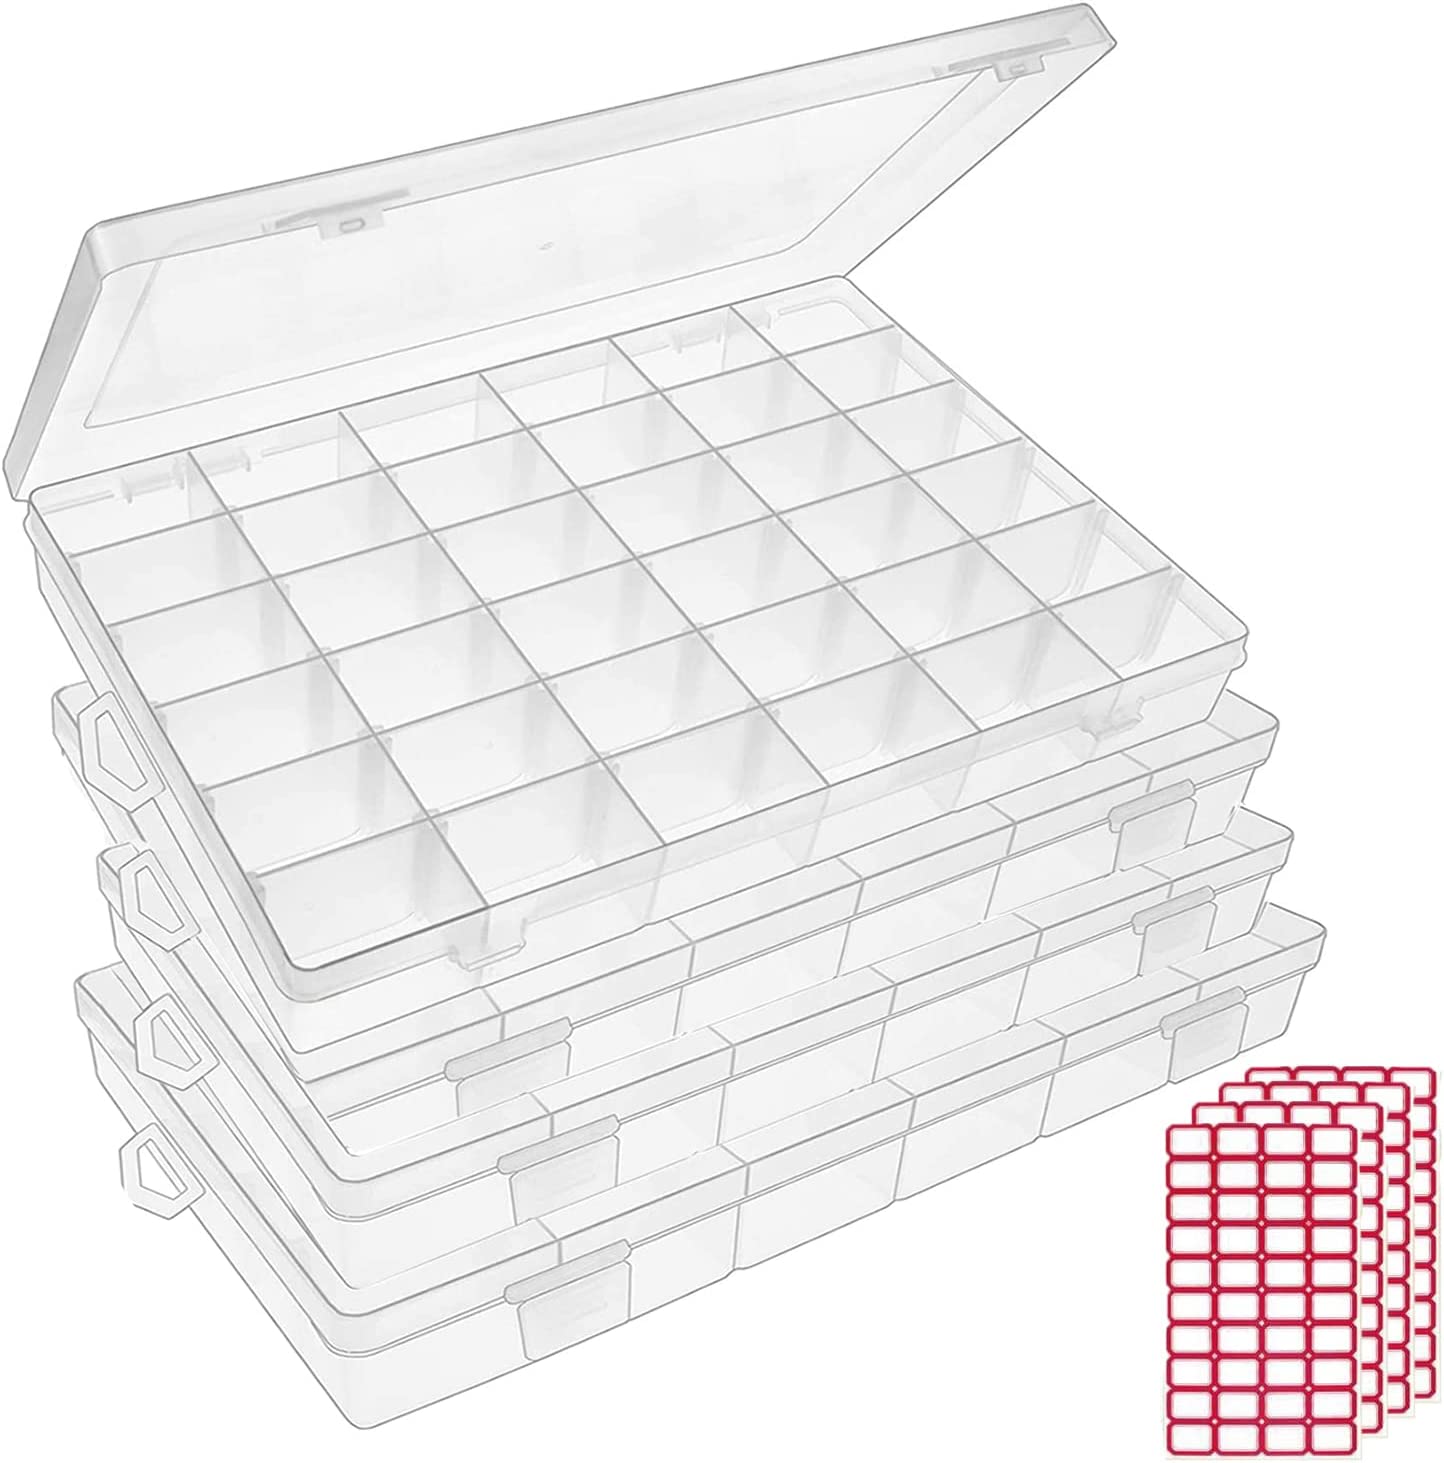 Blulu Clear Bead Organizer Bead Storage Containers Set with 12